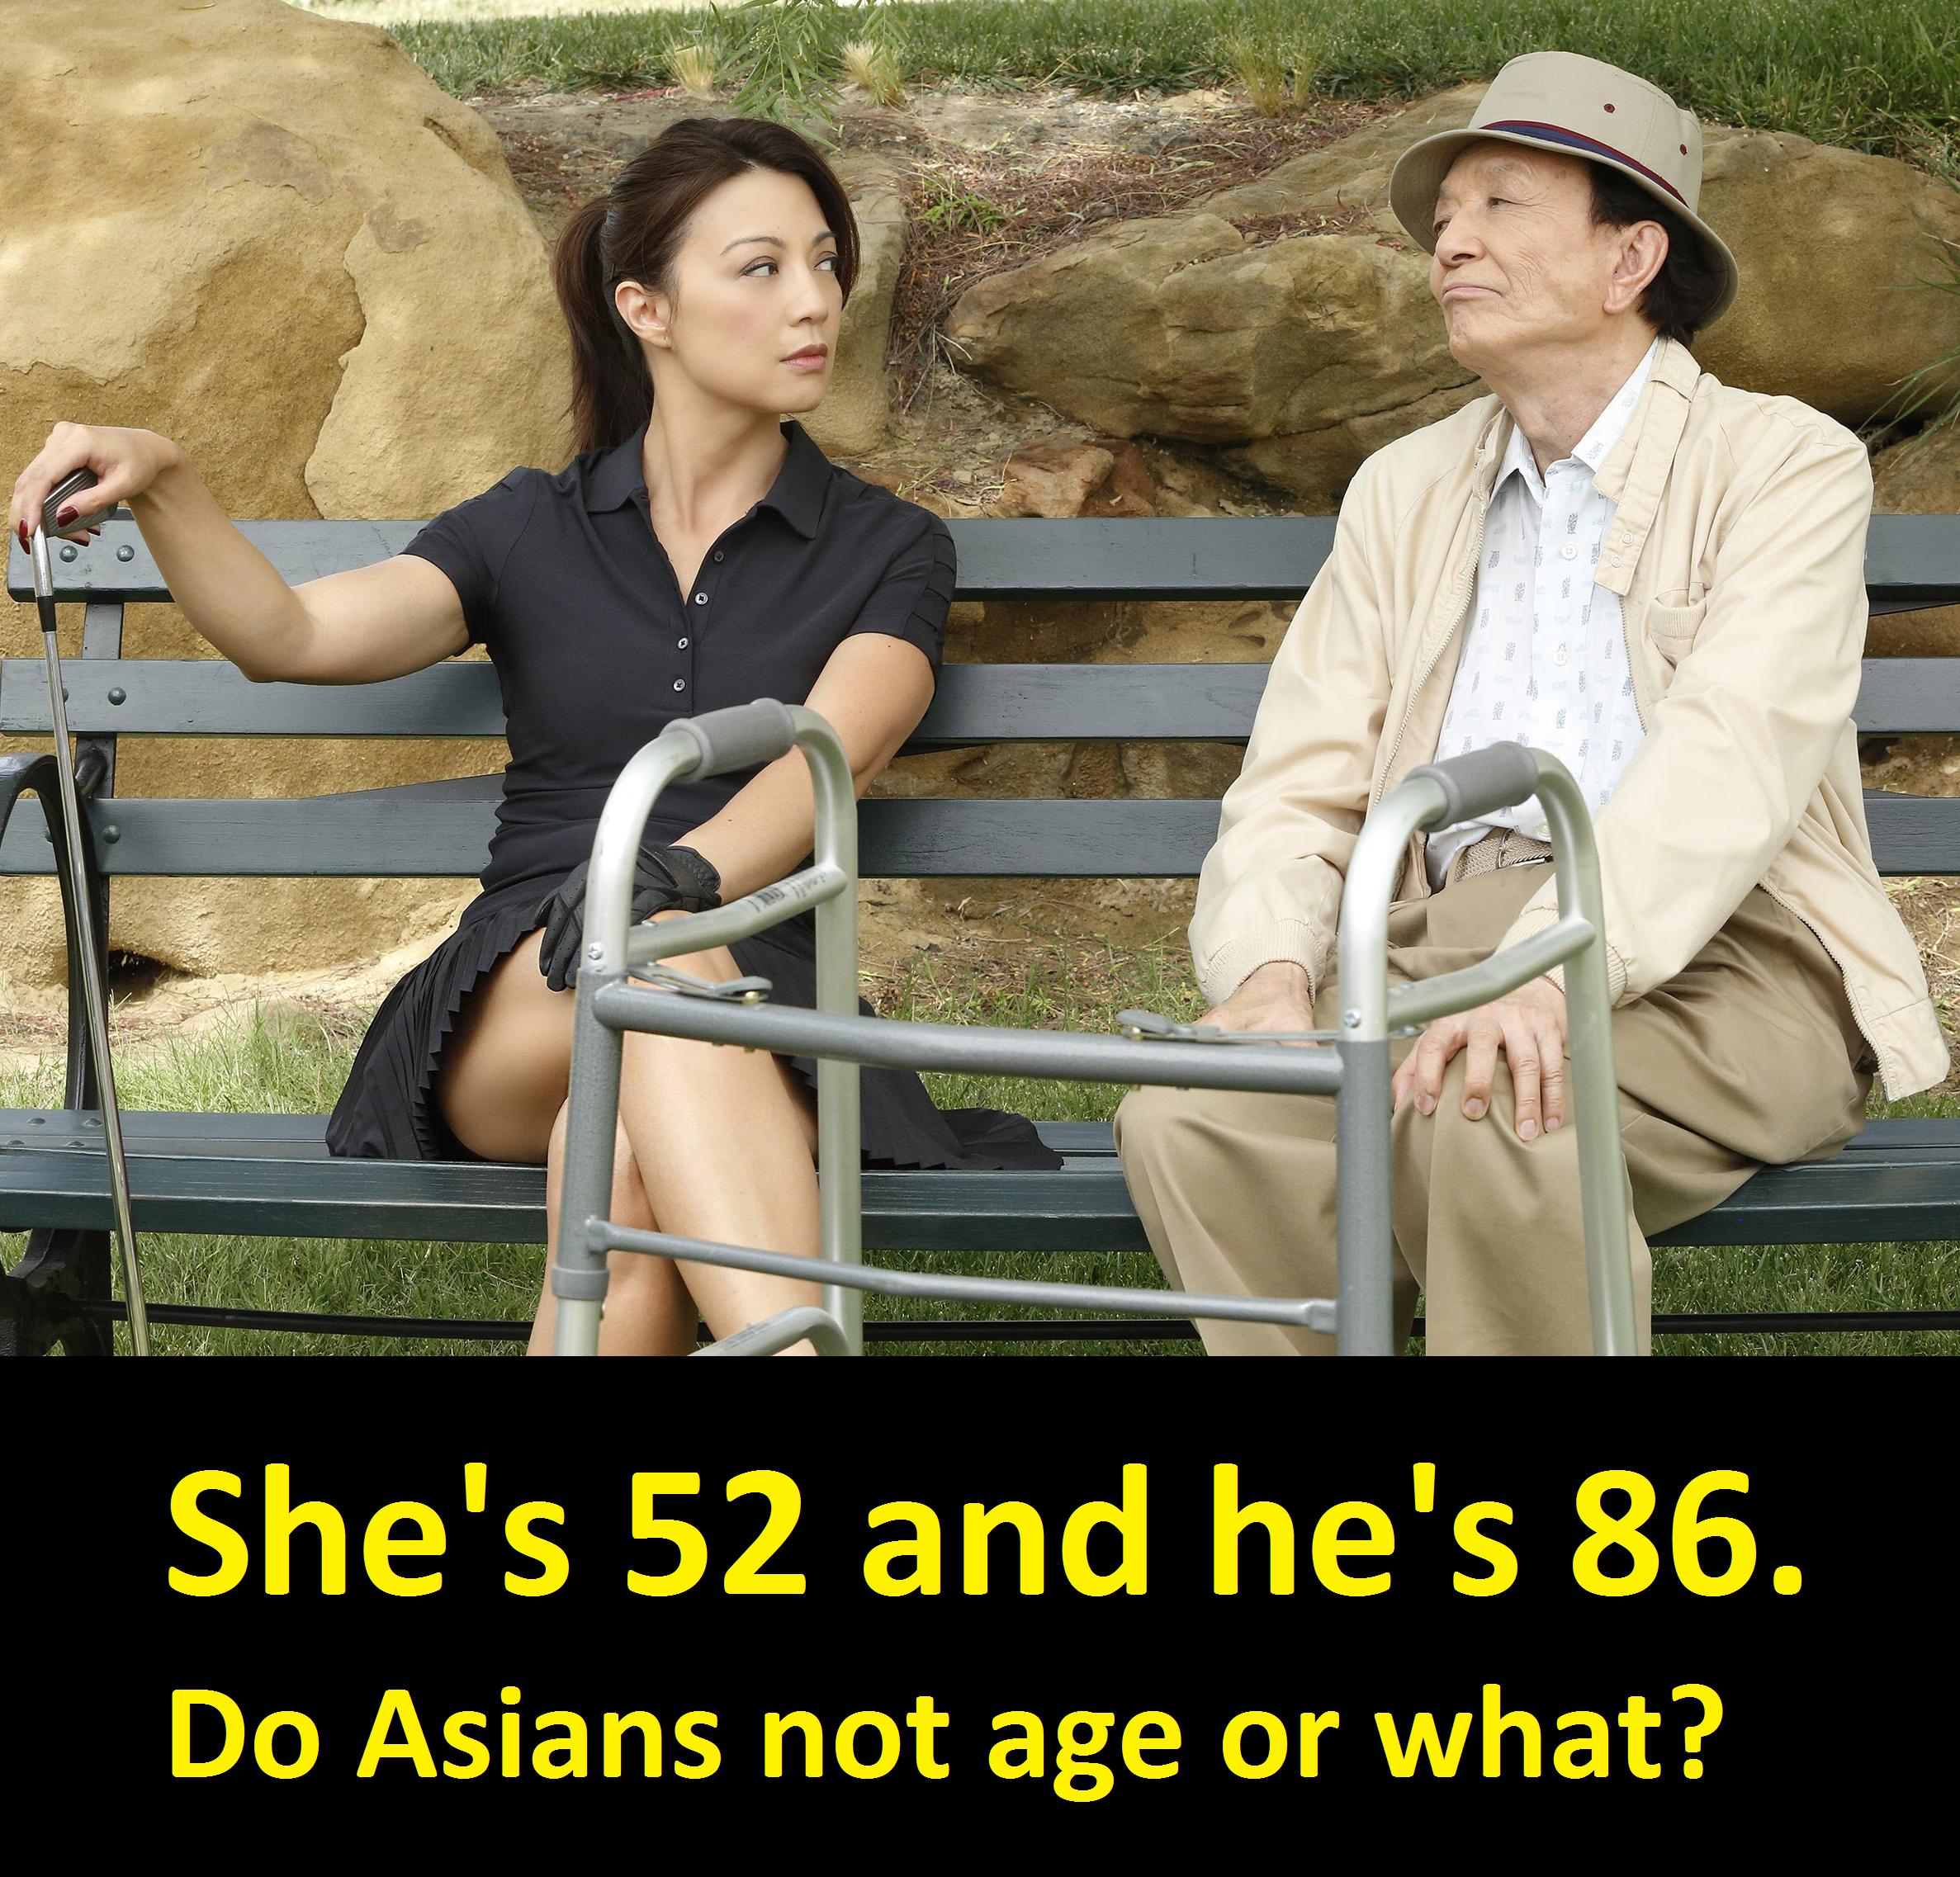 Meme of an Asian couple which the woman is 52 and man is 86 and they look so young.